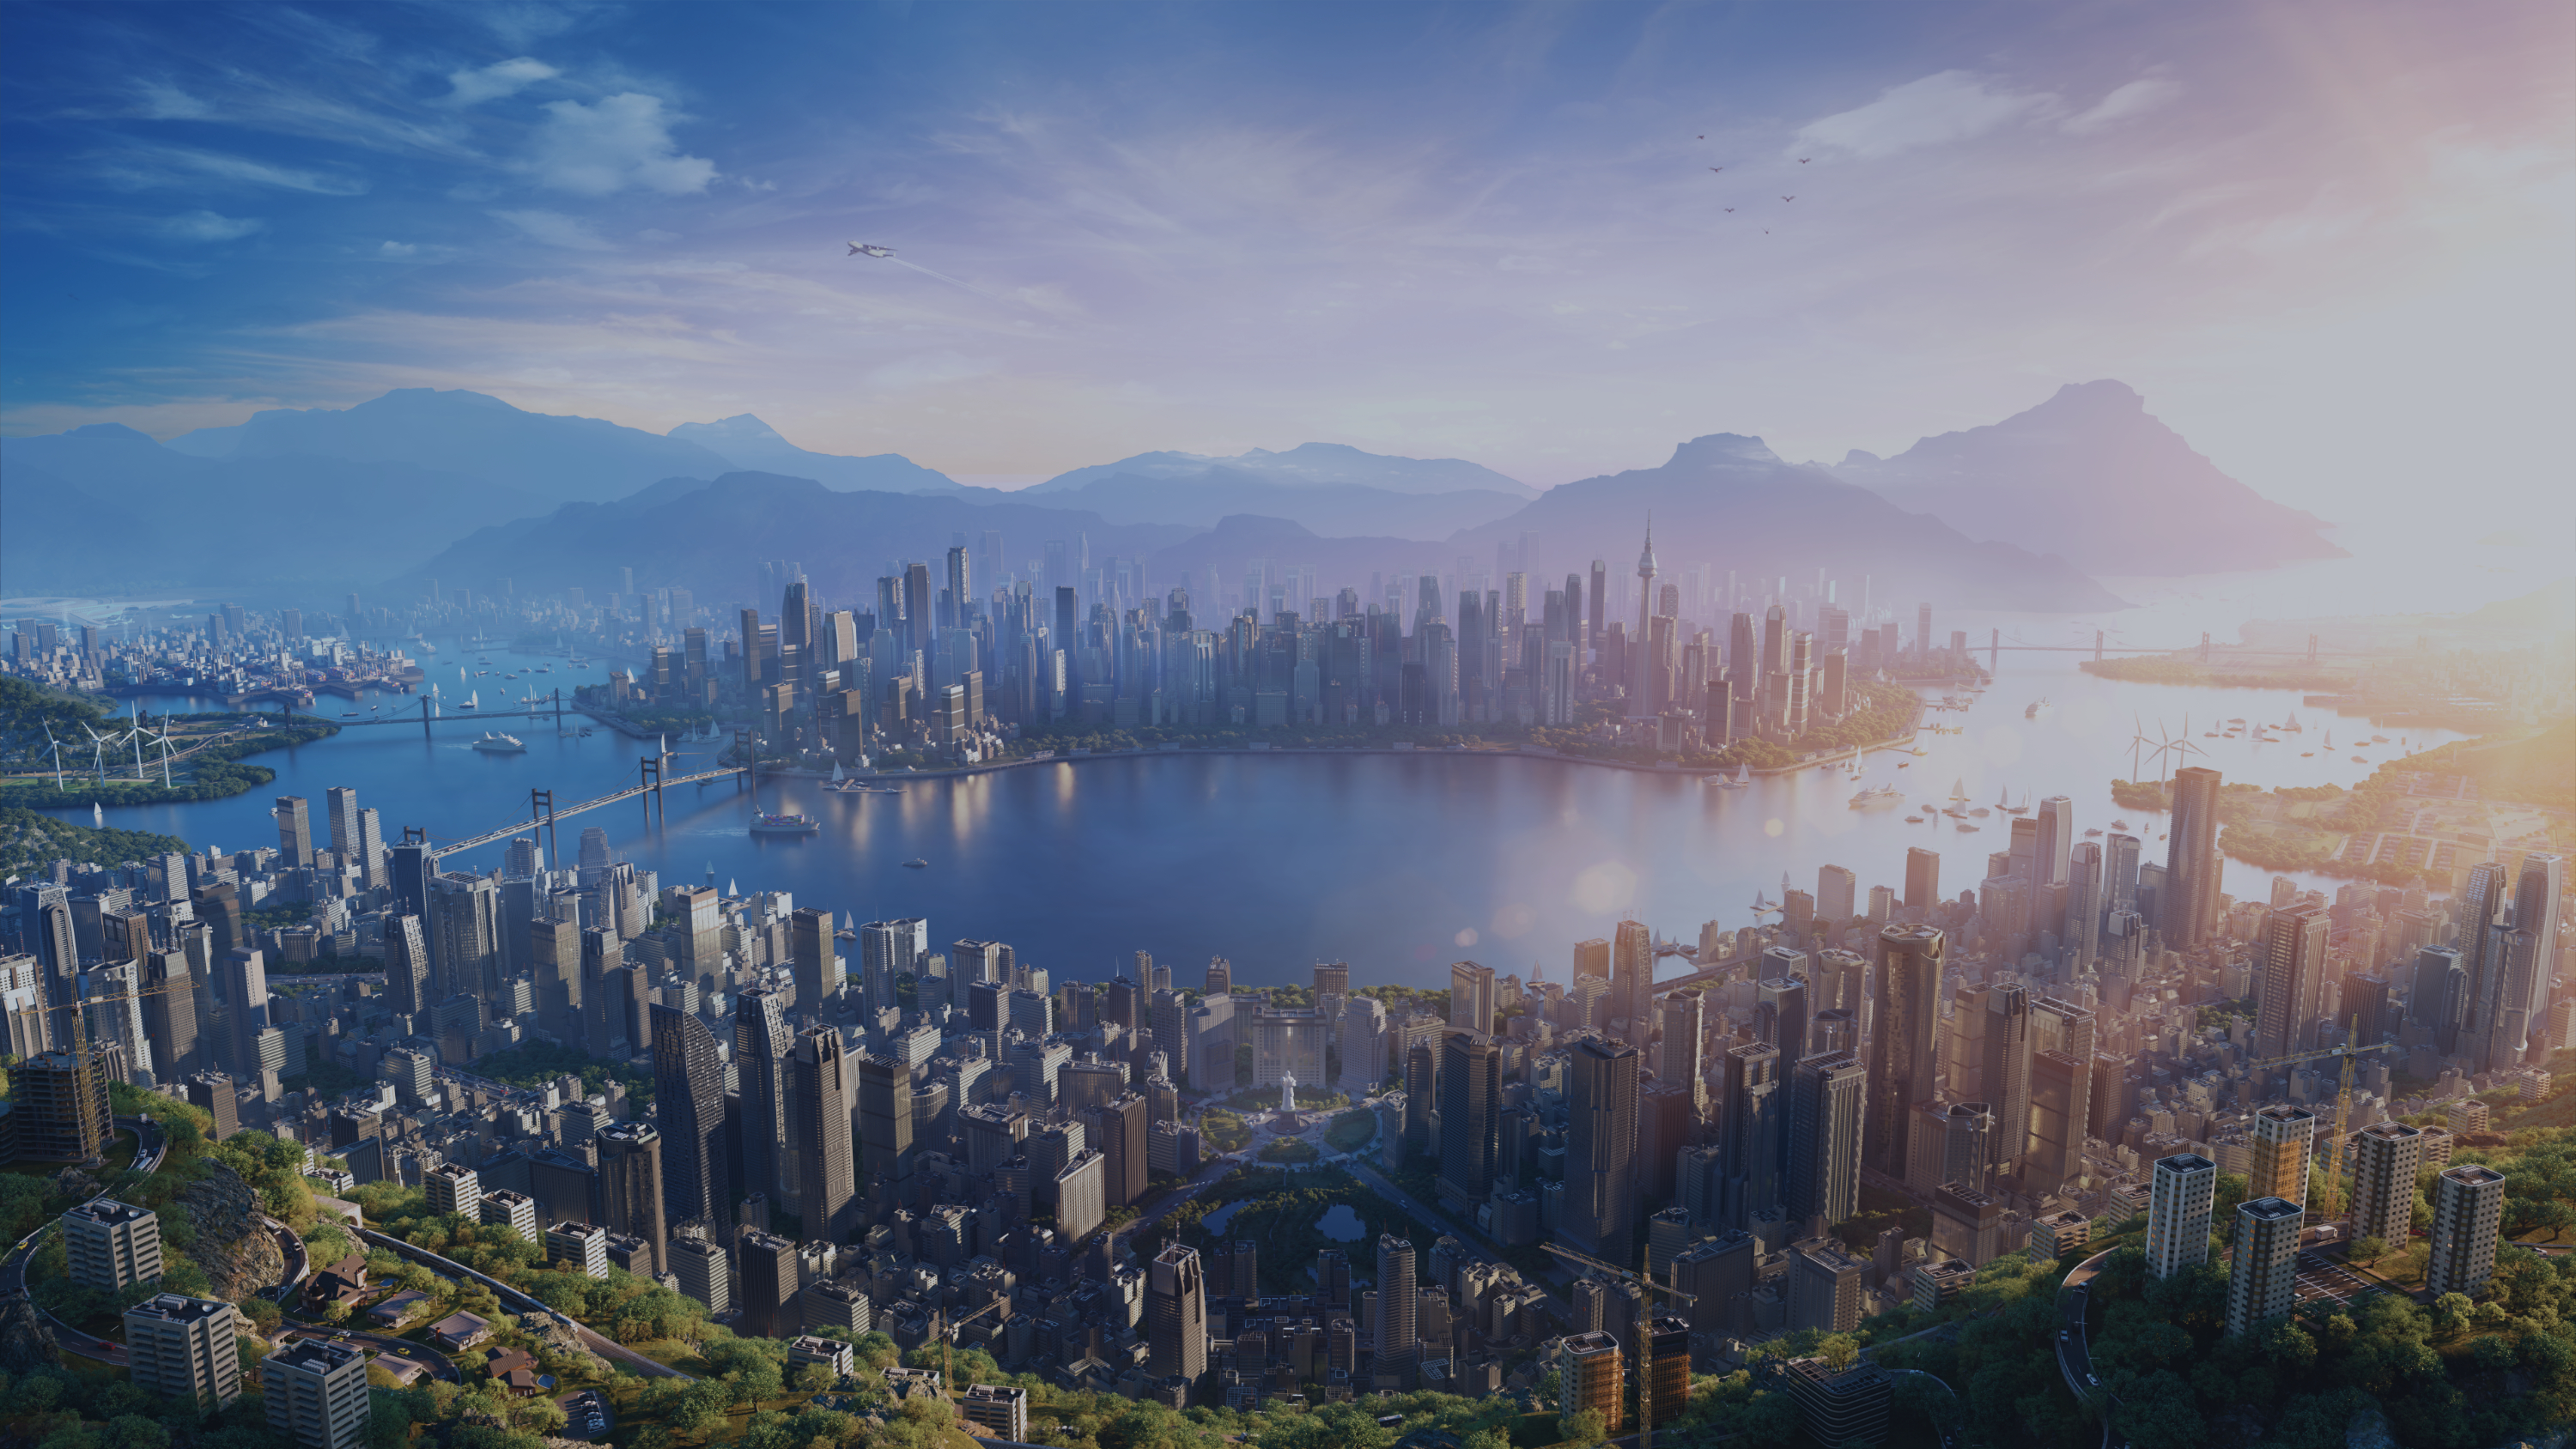 Cities: Skylines 2 announced by Paradox Interactive